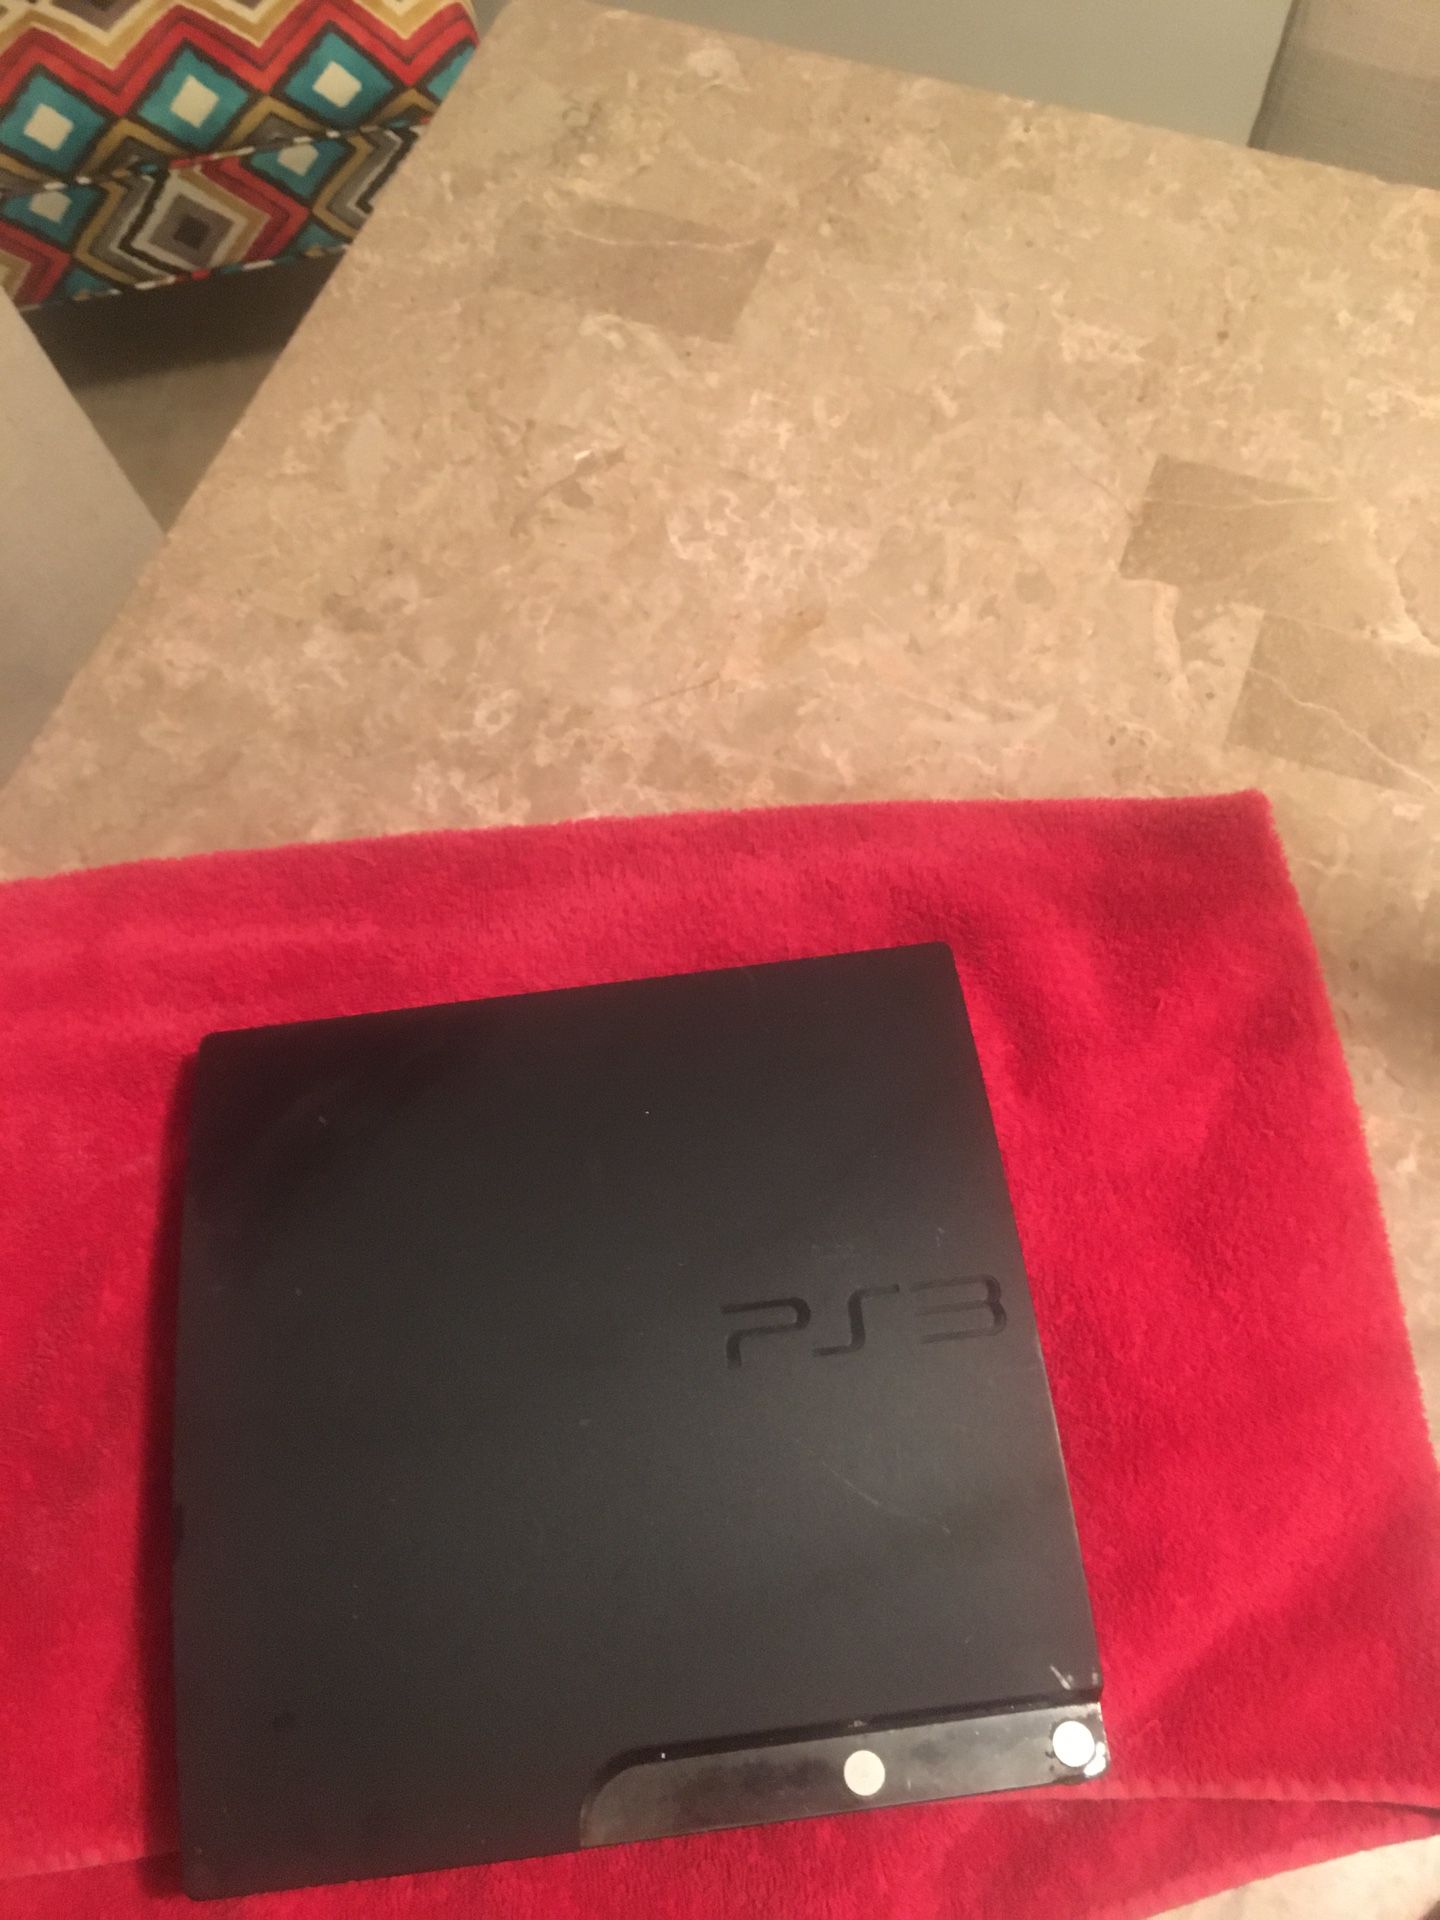 PS3 (No Cords Included)